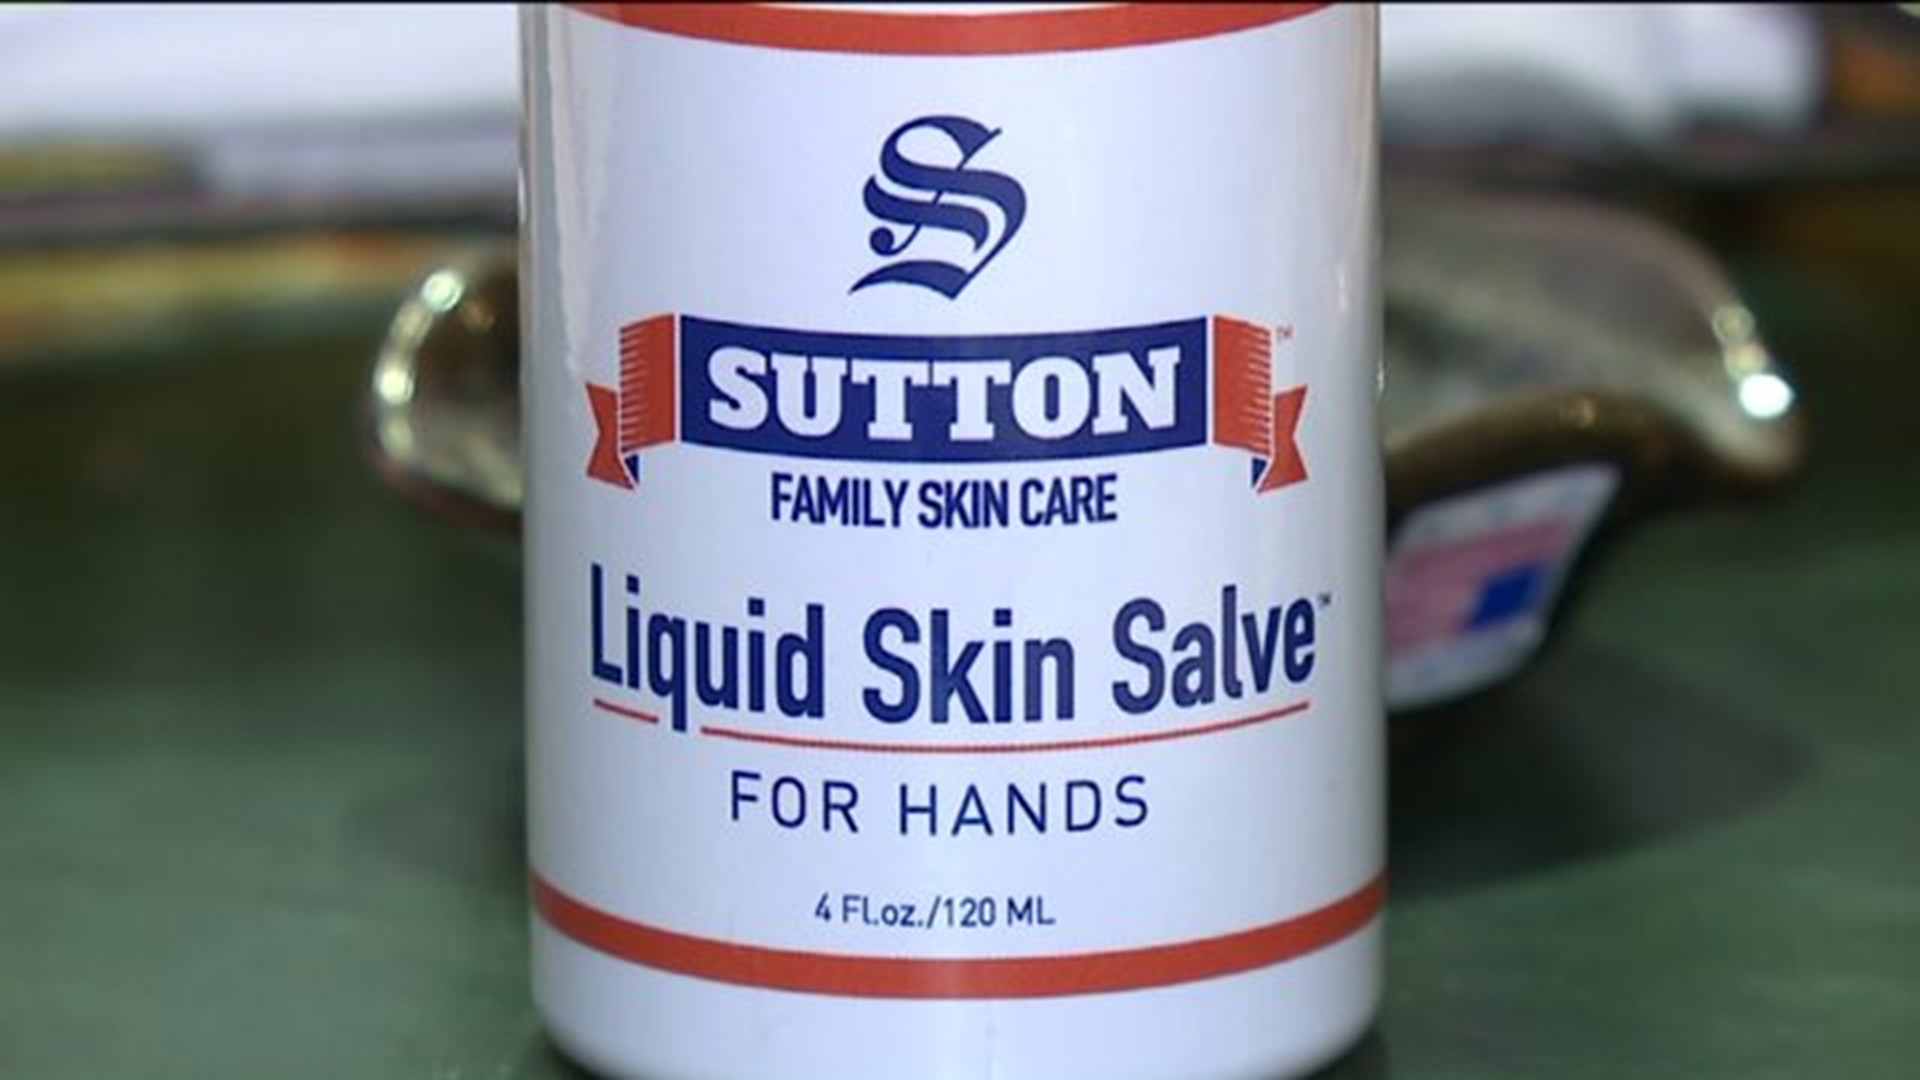 Does it Really Work: Sutton Family Cream